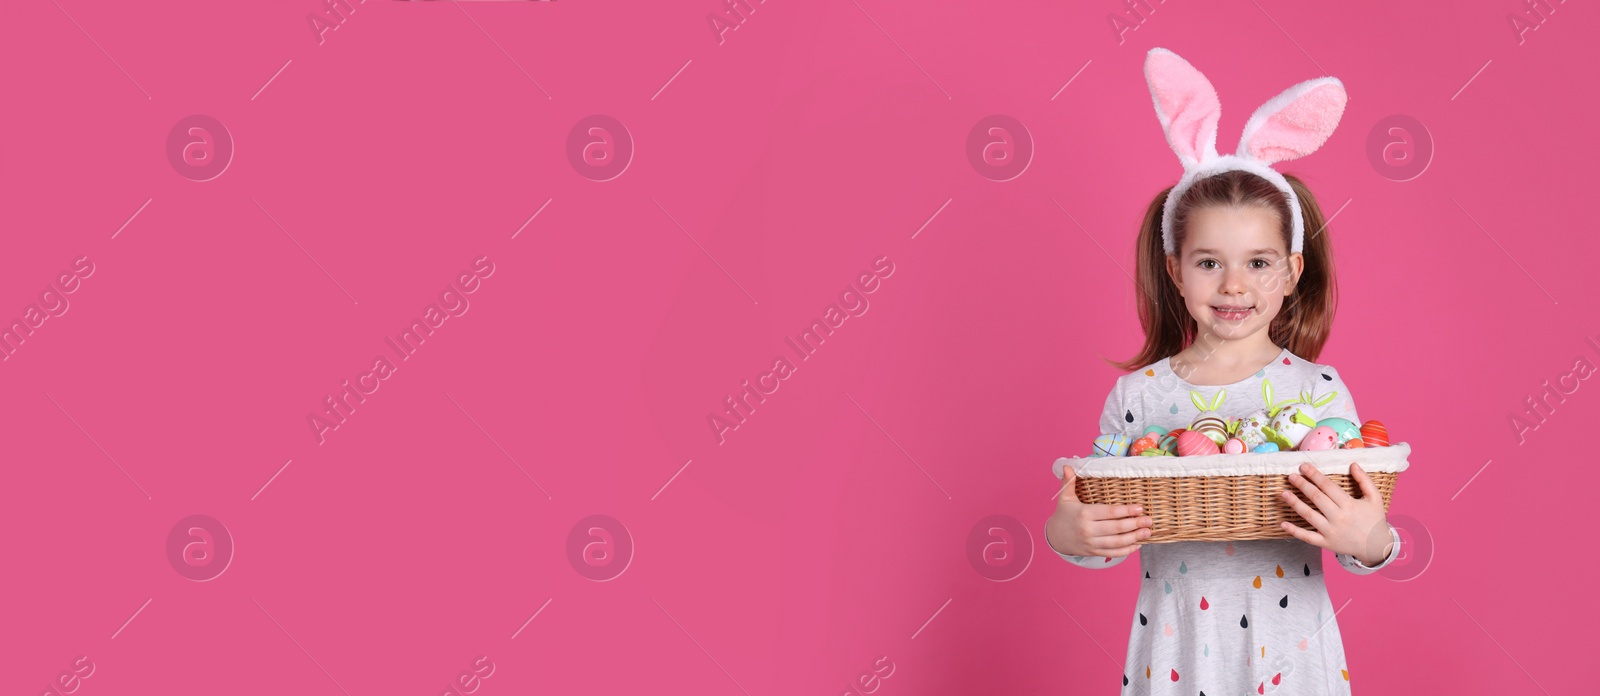 Photo of Adorable little girl with bunny ears holding wicker basket full of Easter eggs on pink background. Space for text